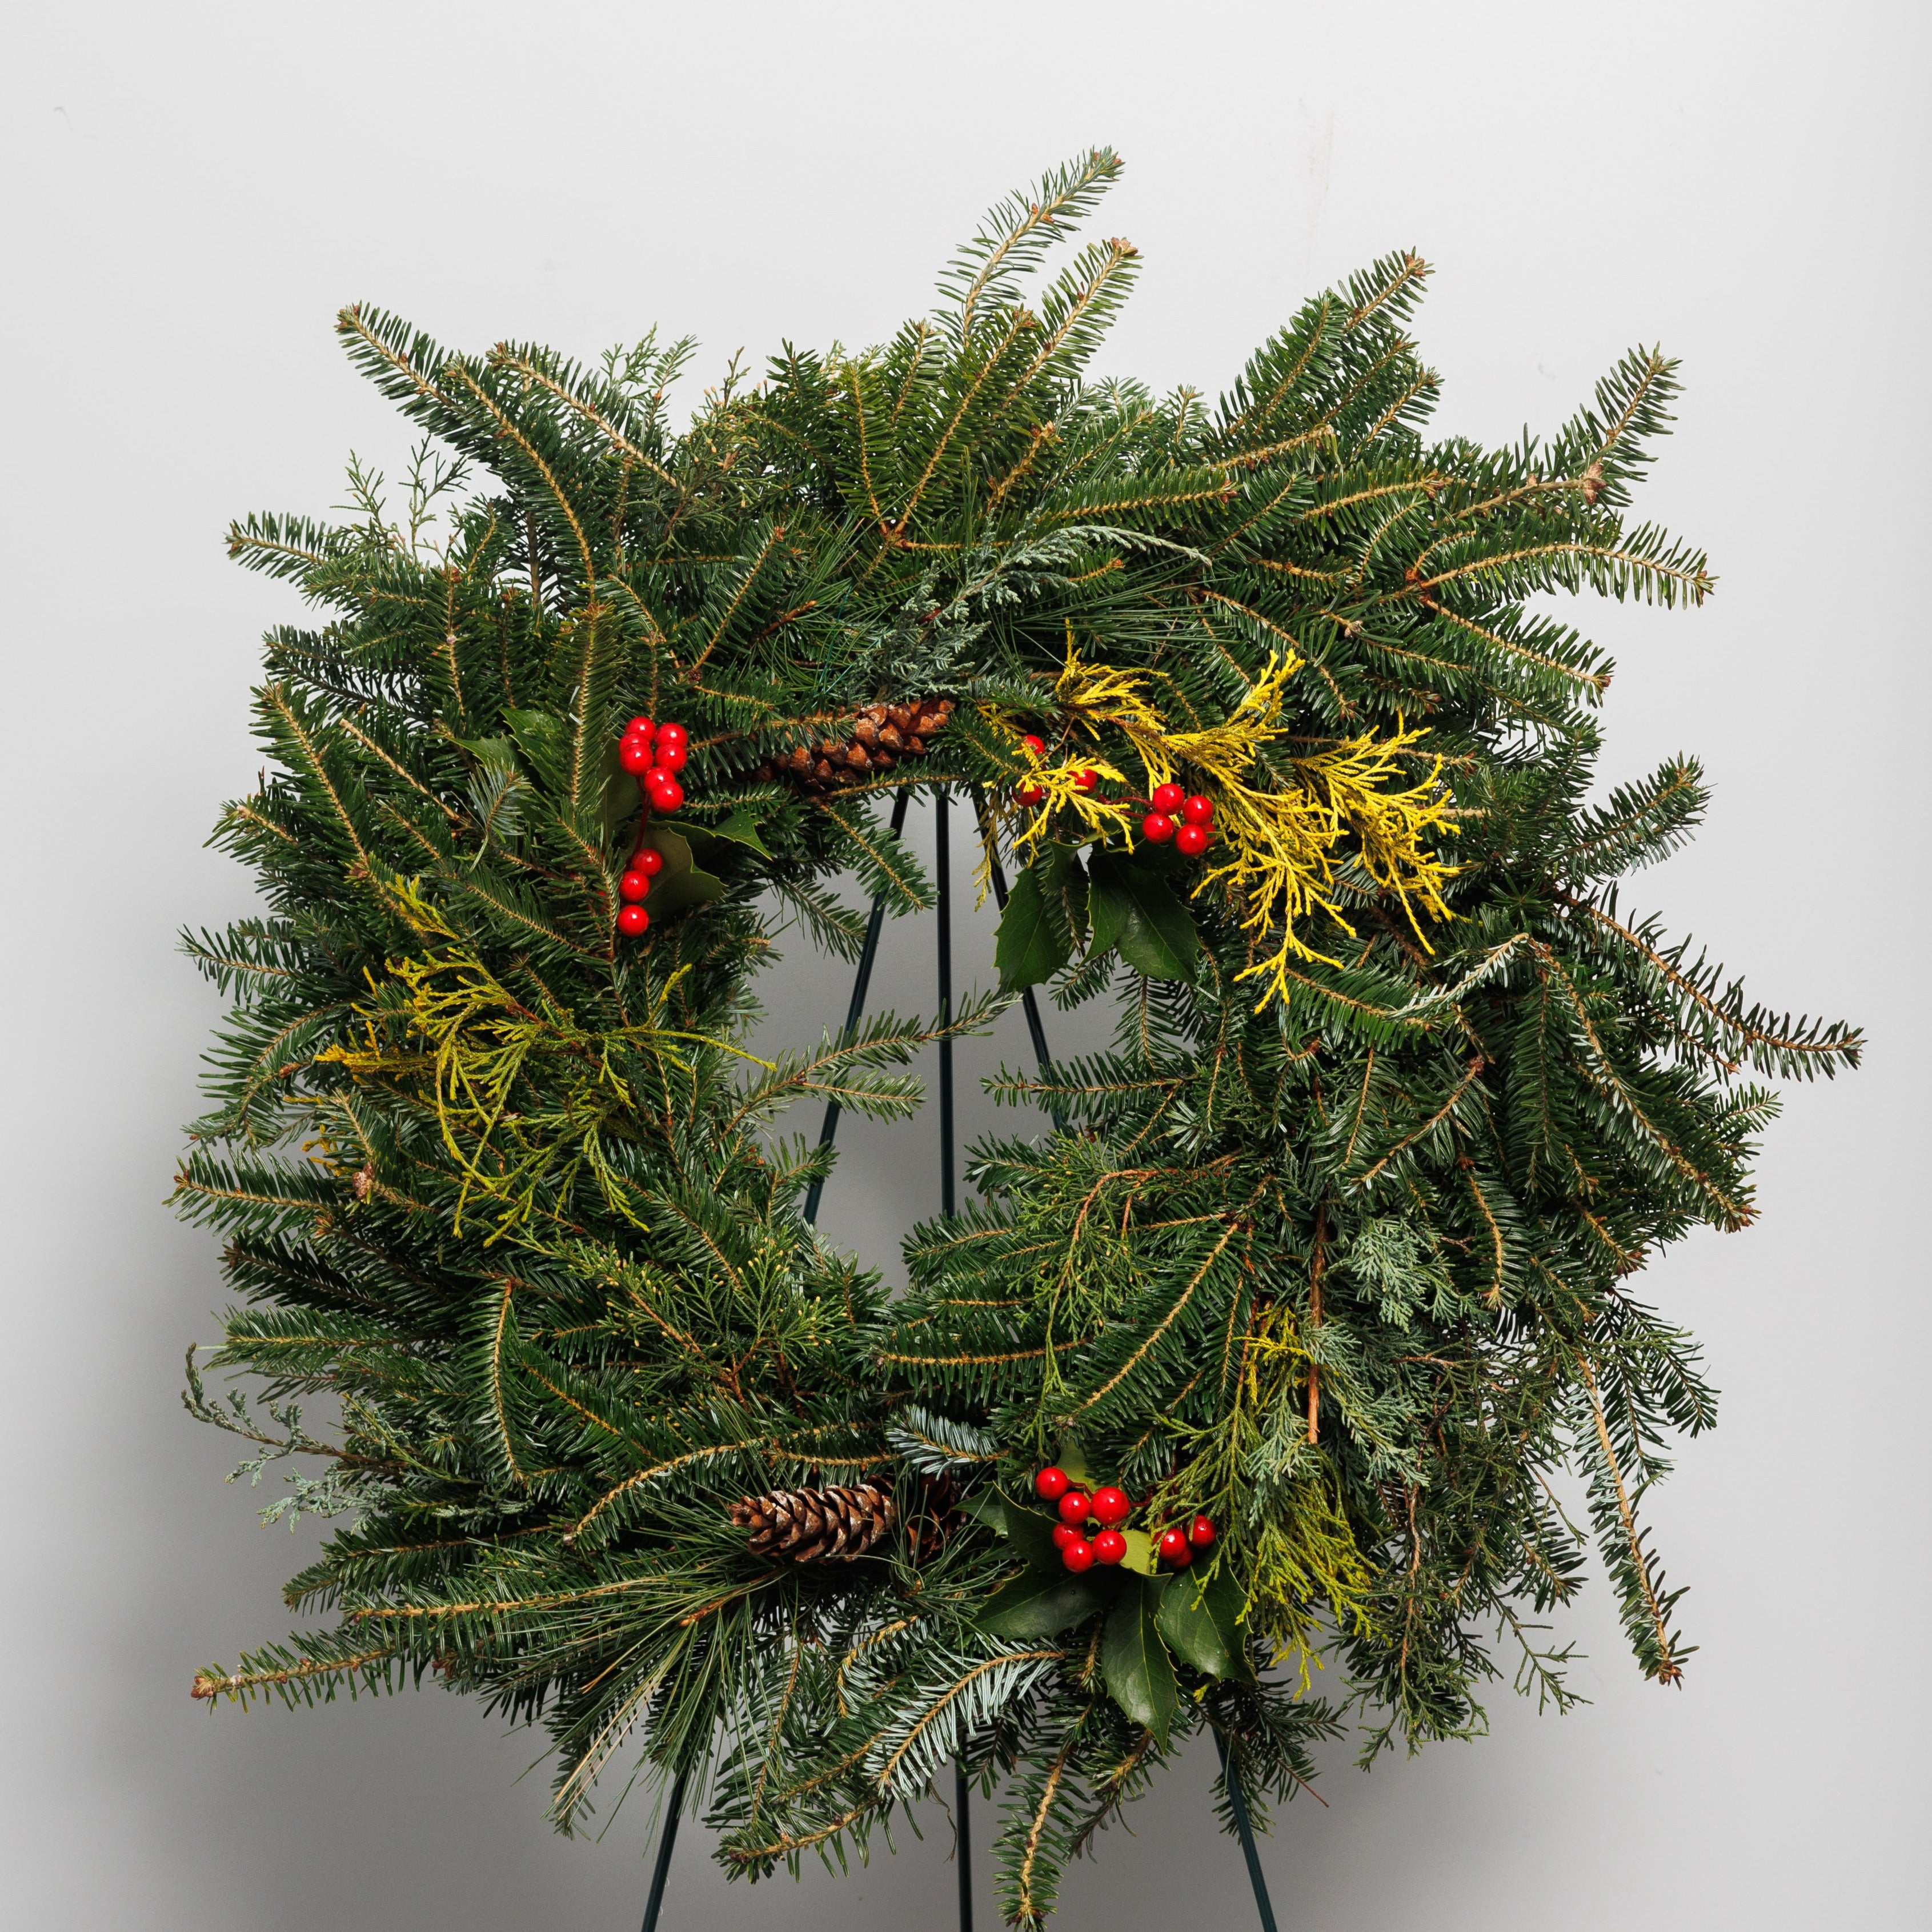 A mixed greens wreath with berries and cones.